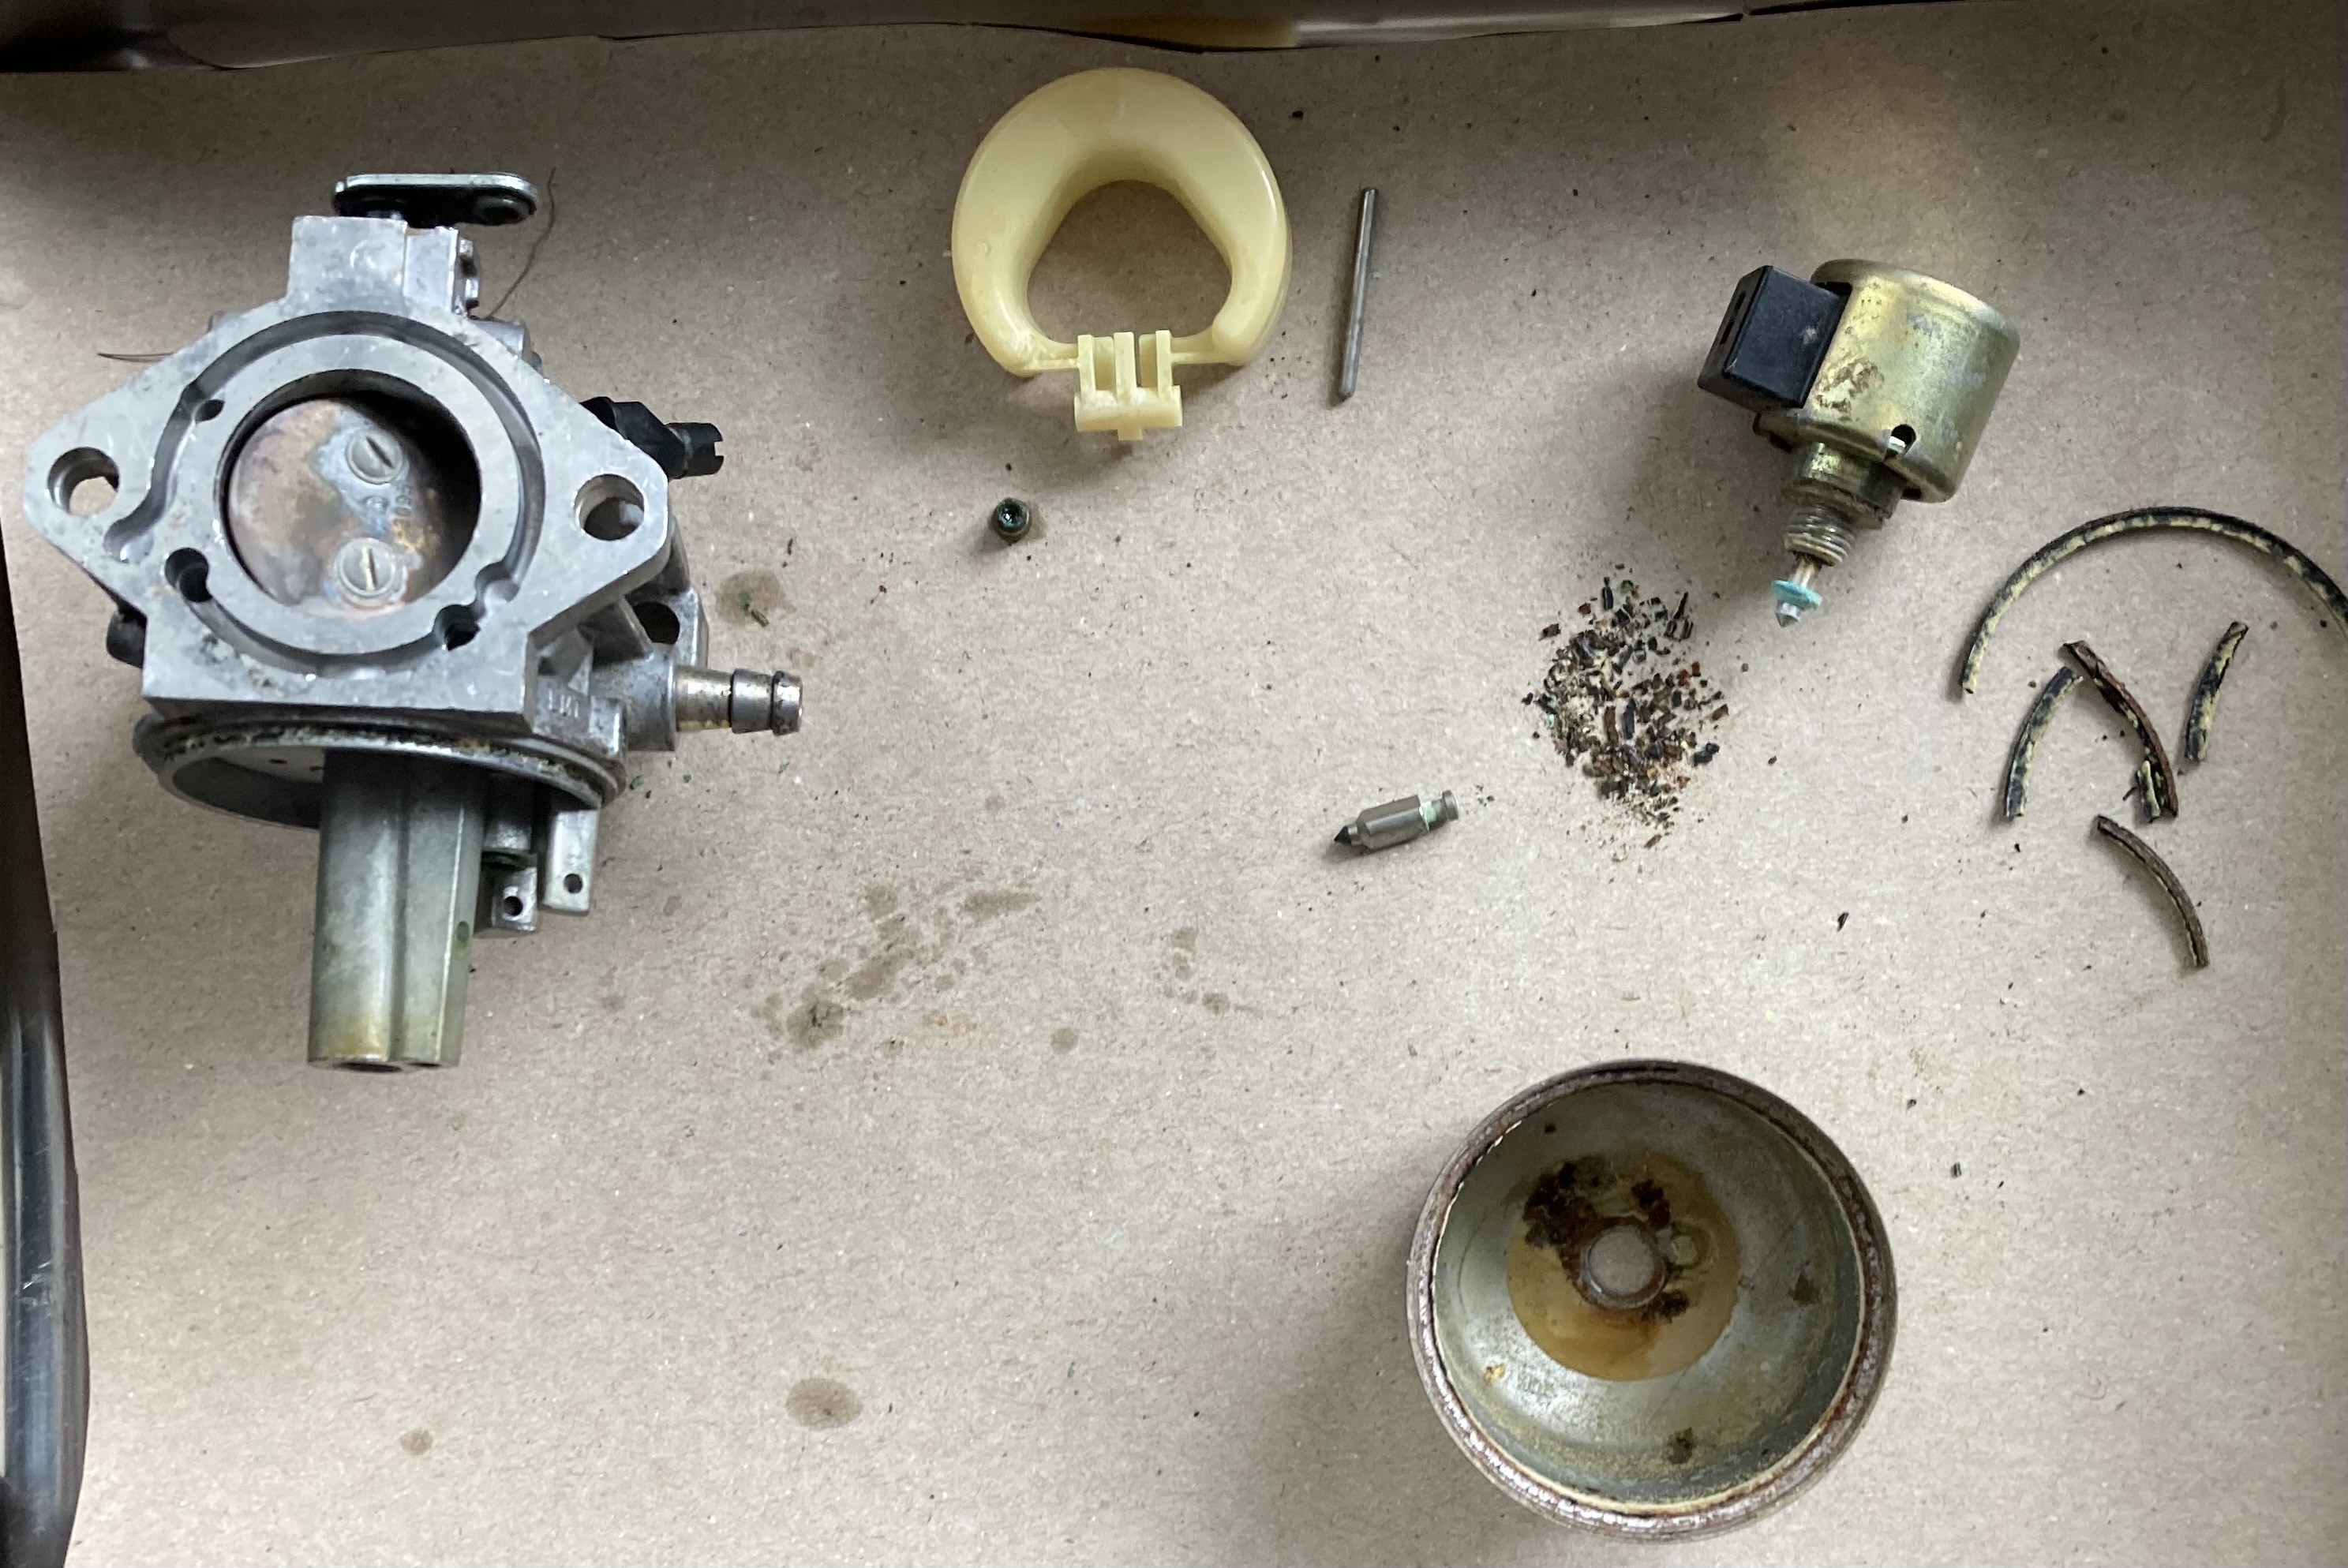 Walbro LMT-4993 carb with rust/dirt in float bowl